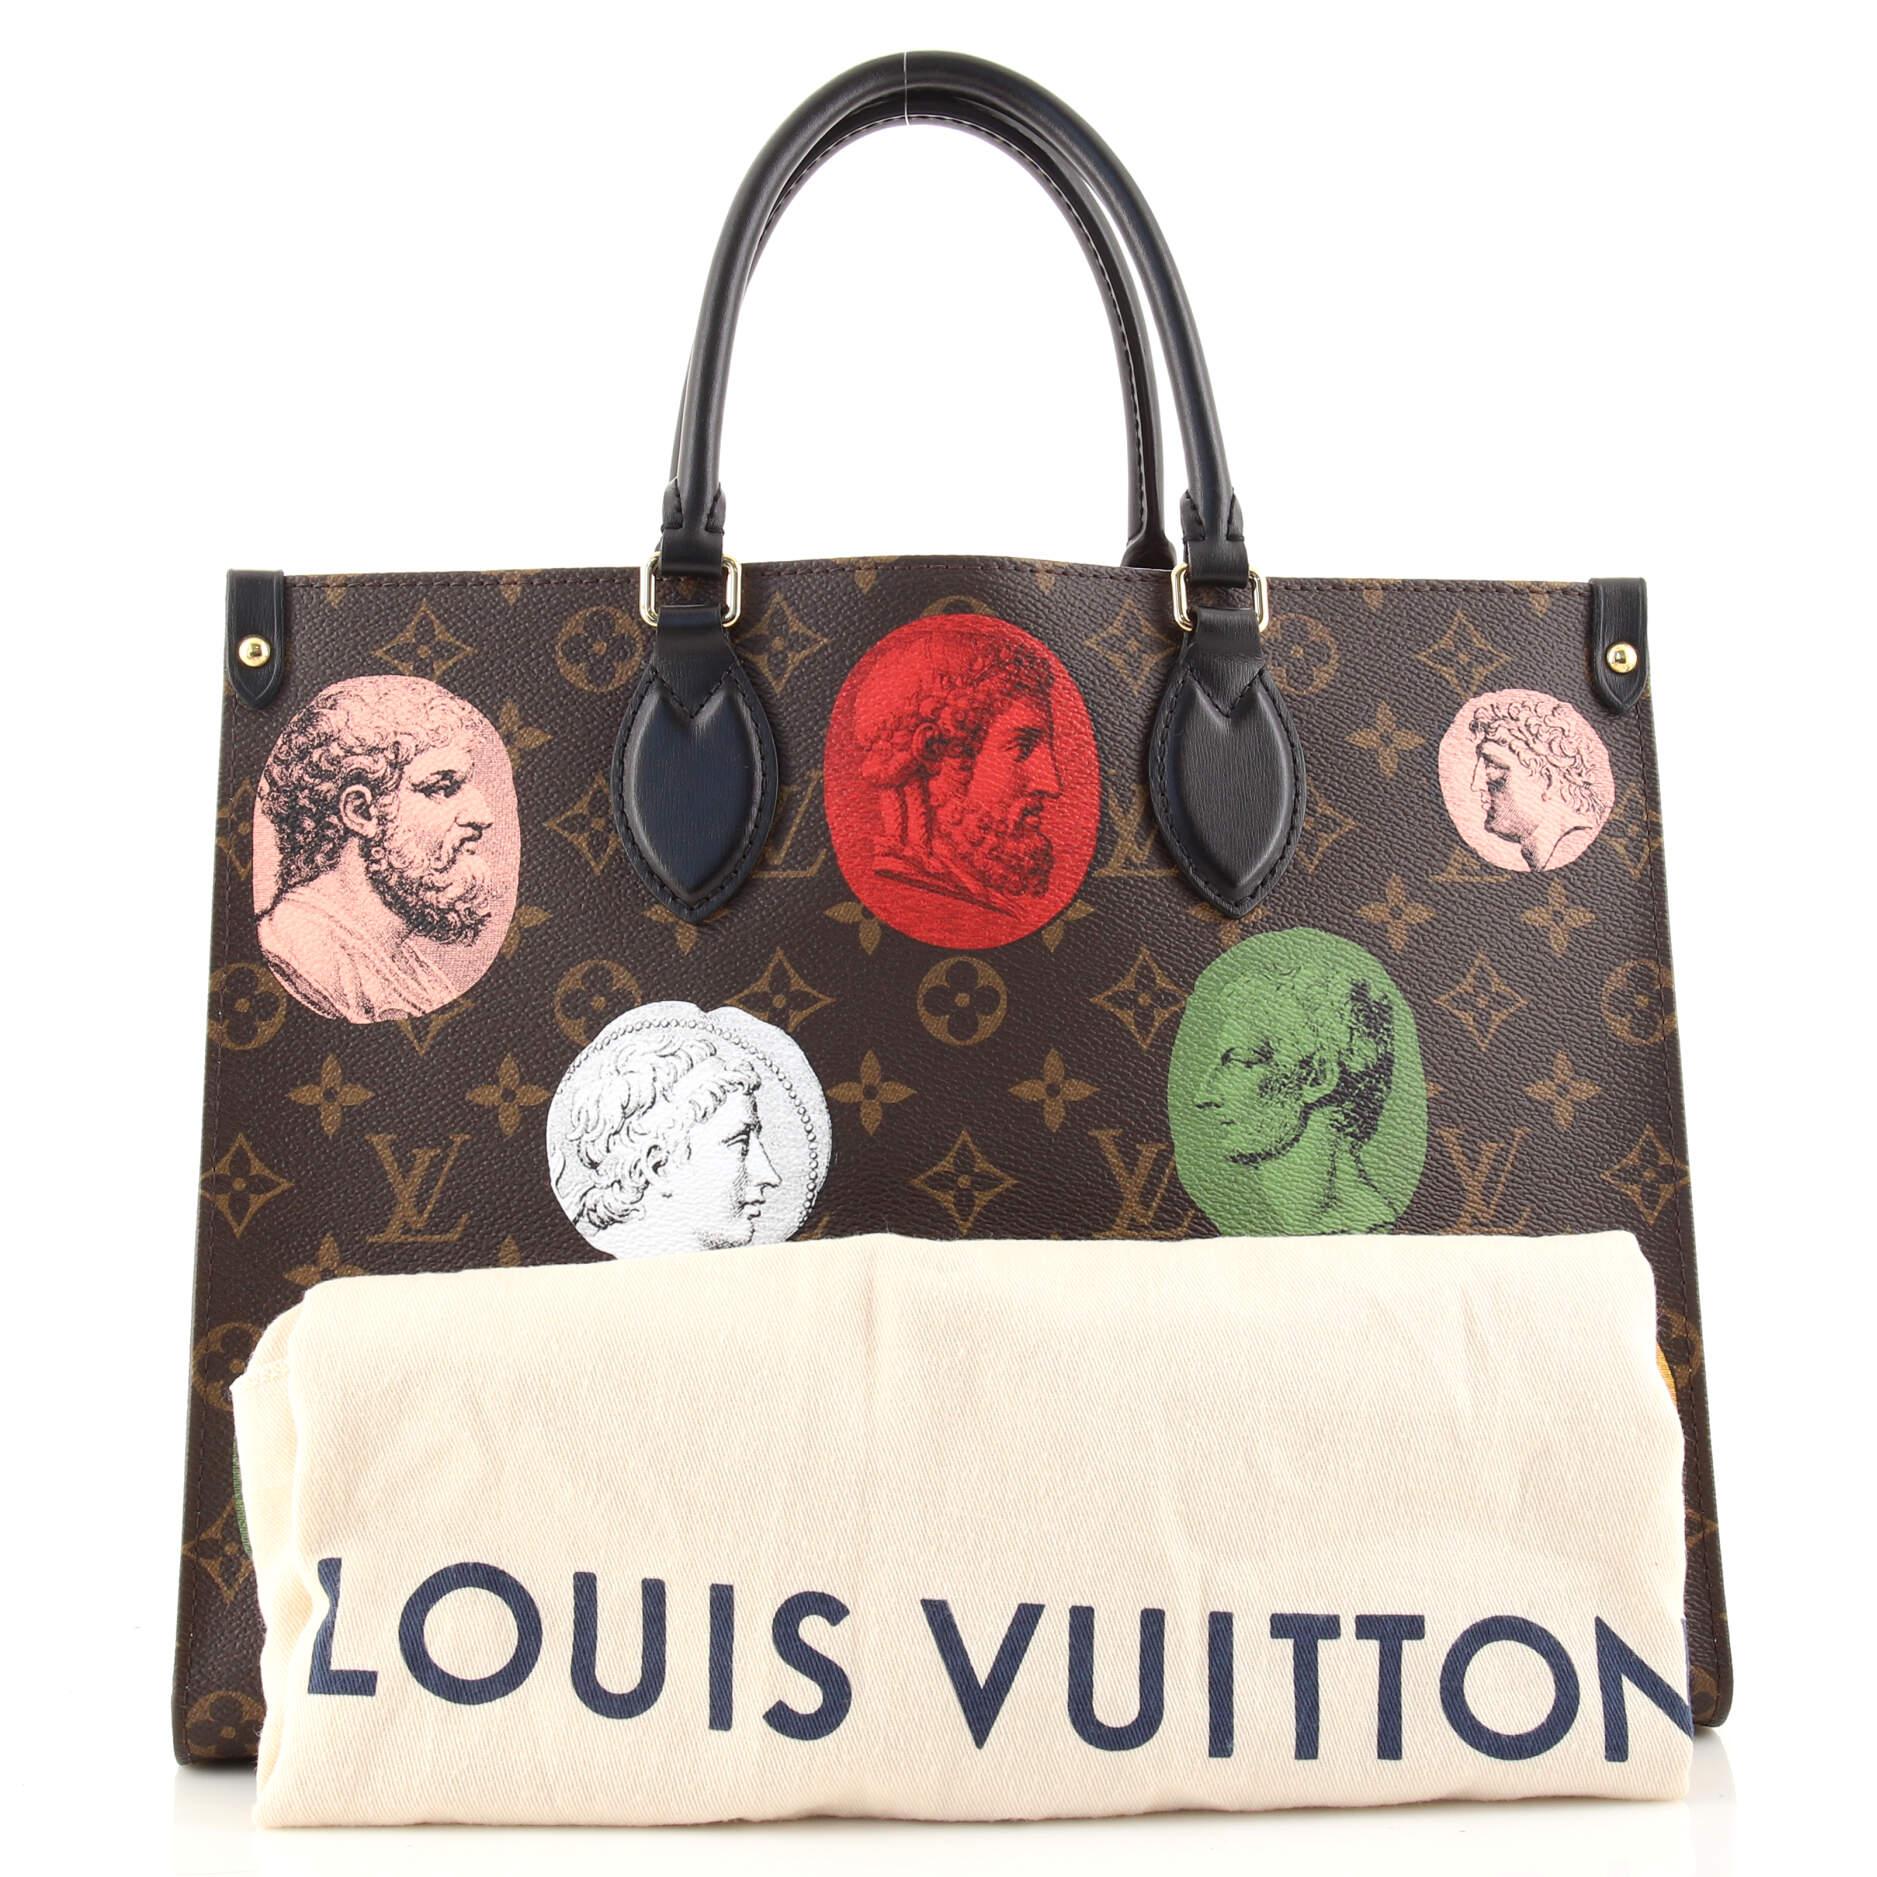 Louis Vuitton NEVERFULL handbag PERSONALIZATION by HOT STAMPING method 